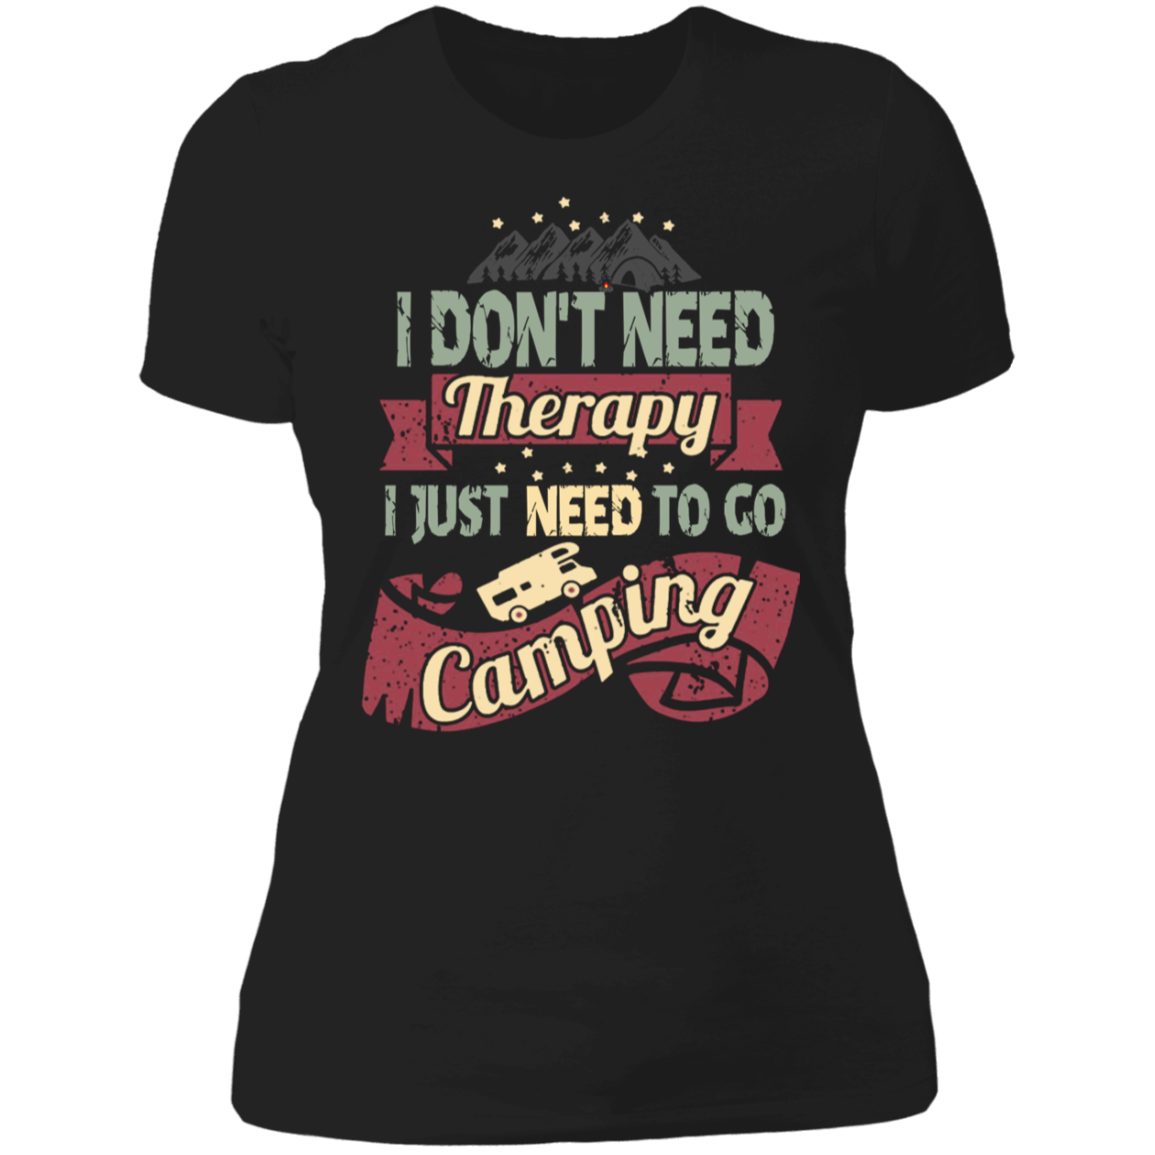 I Don't Need Therapy Need to Go Camping Unisex T-Shirt, Sweatshirt, Hoodie